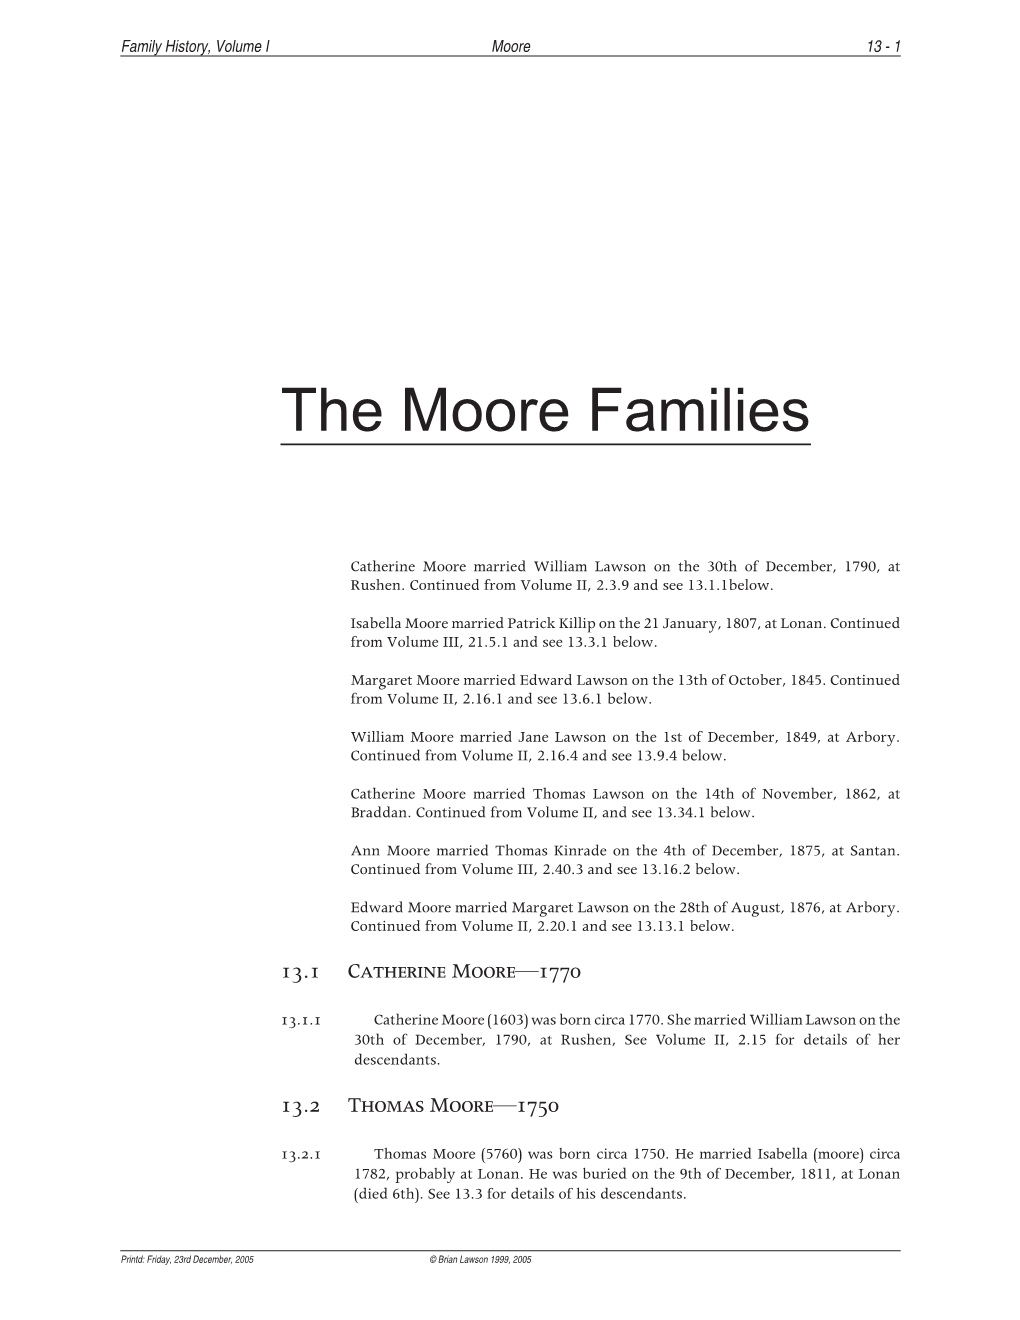 The Moore Families